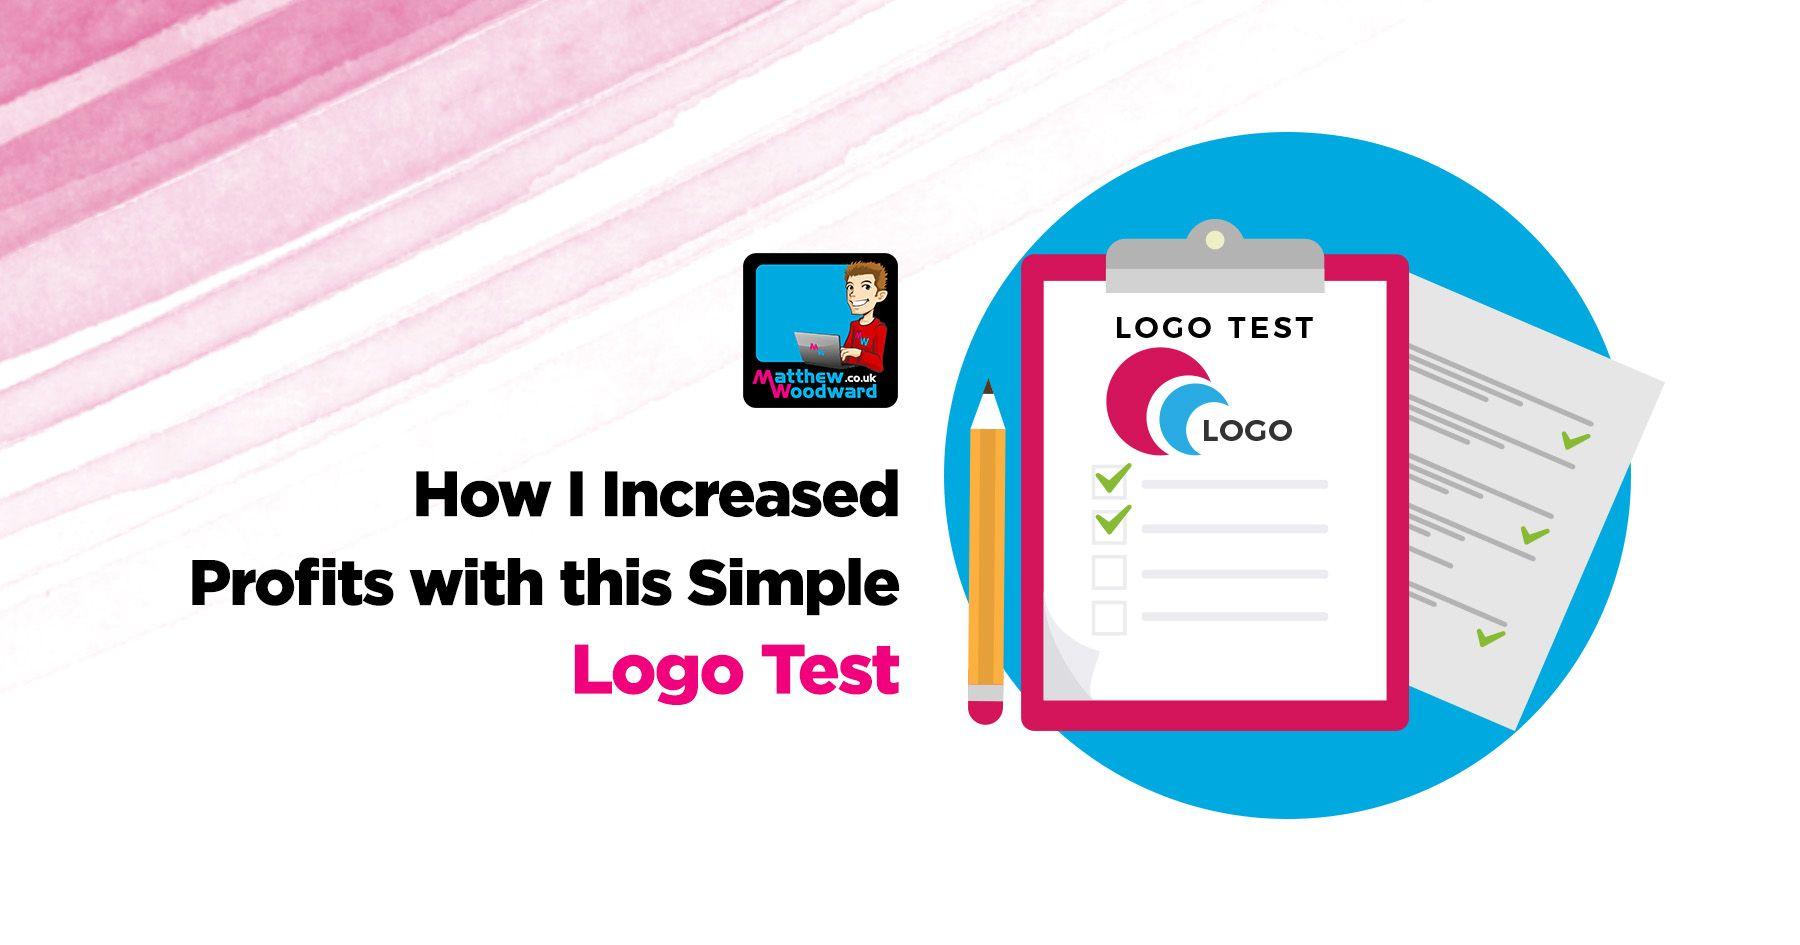 Test Logo - How I Increased Profits With This Simple Logo Test